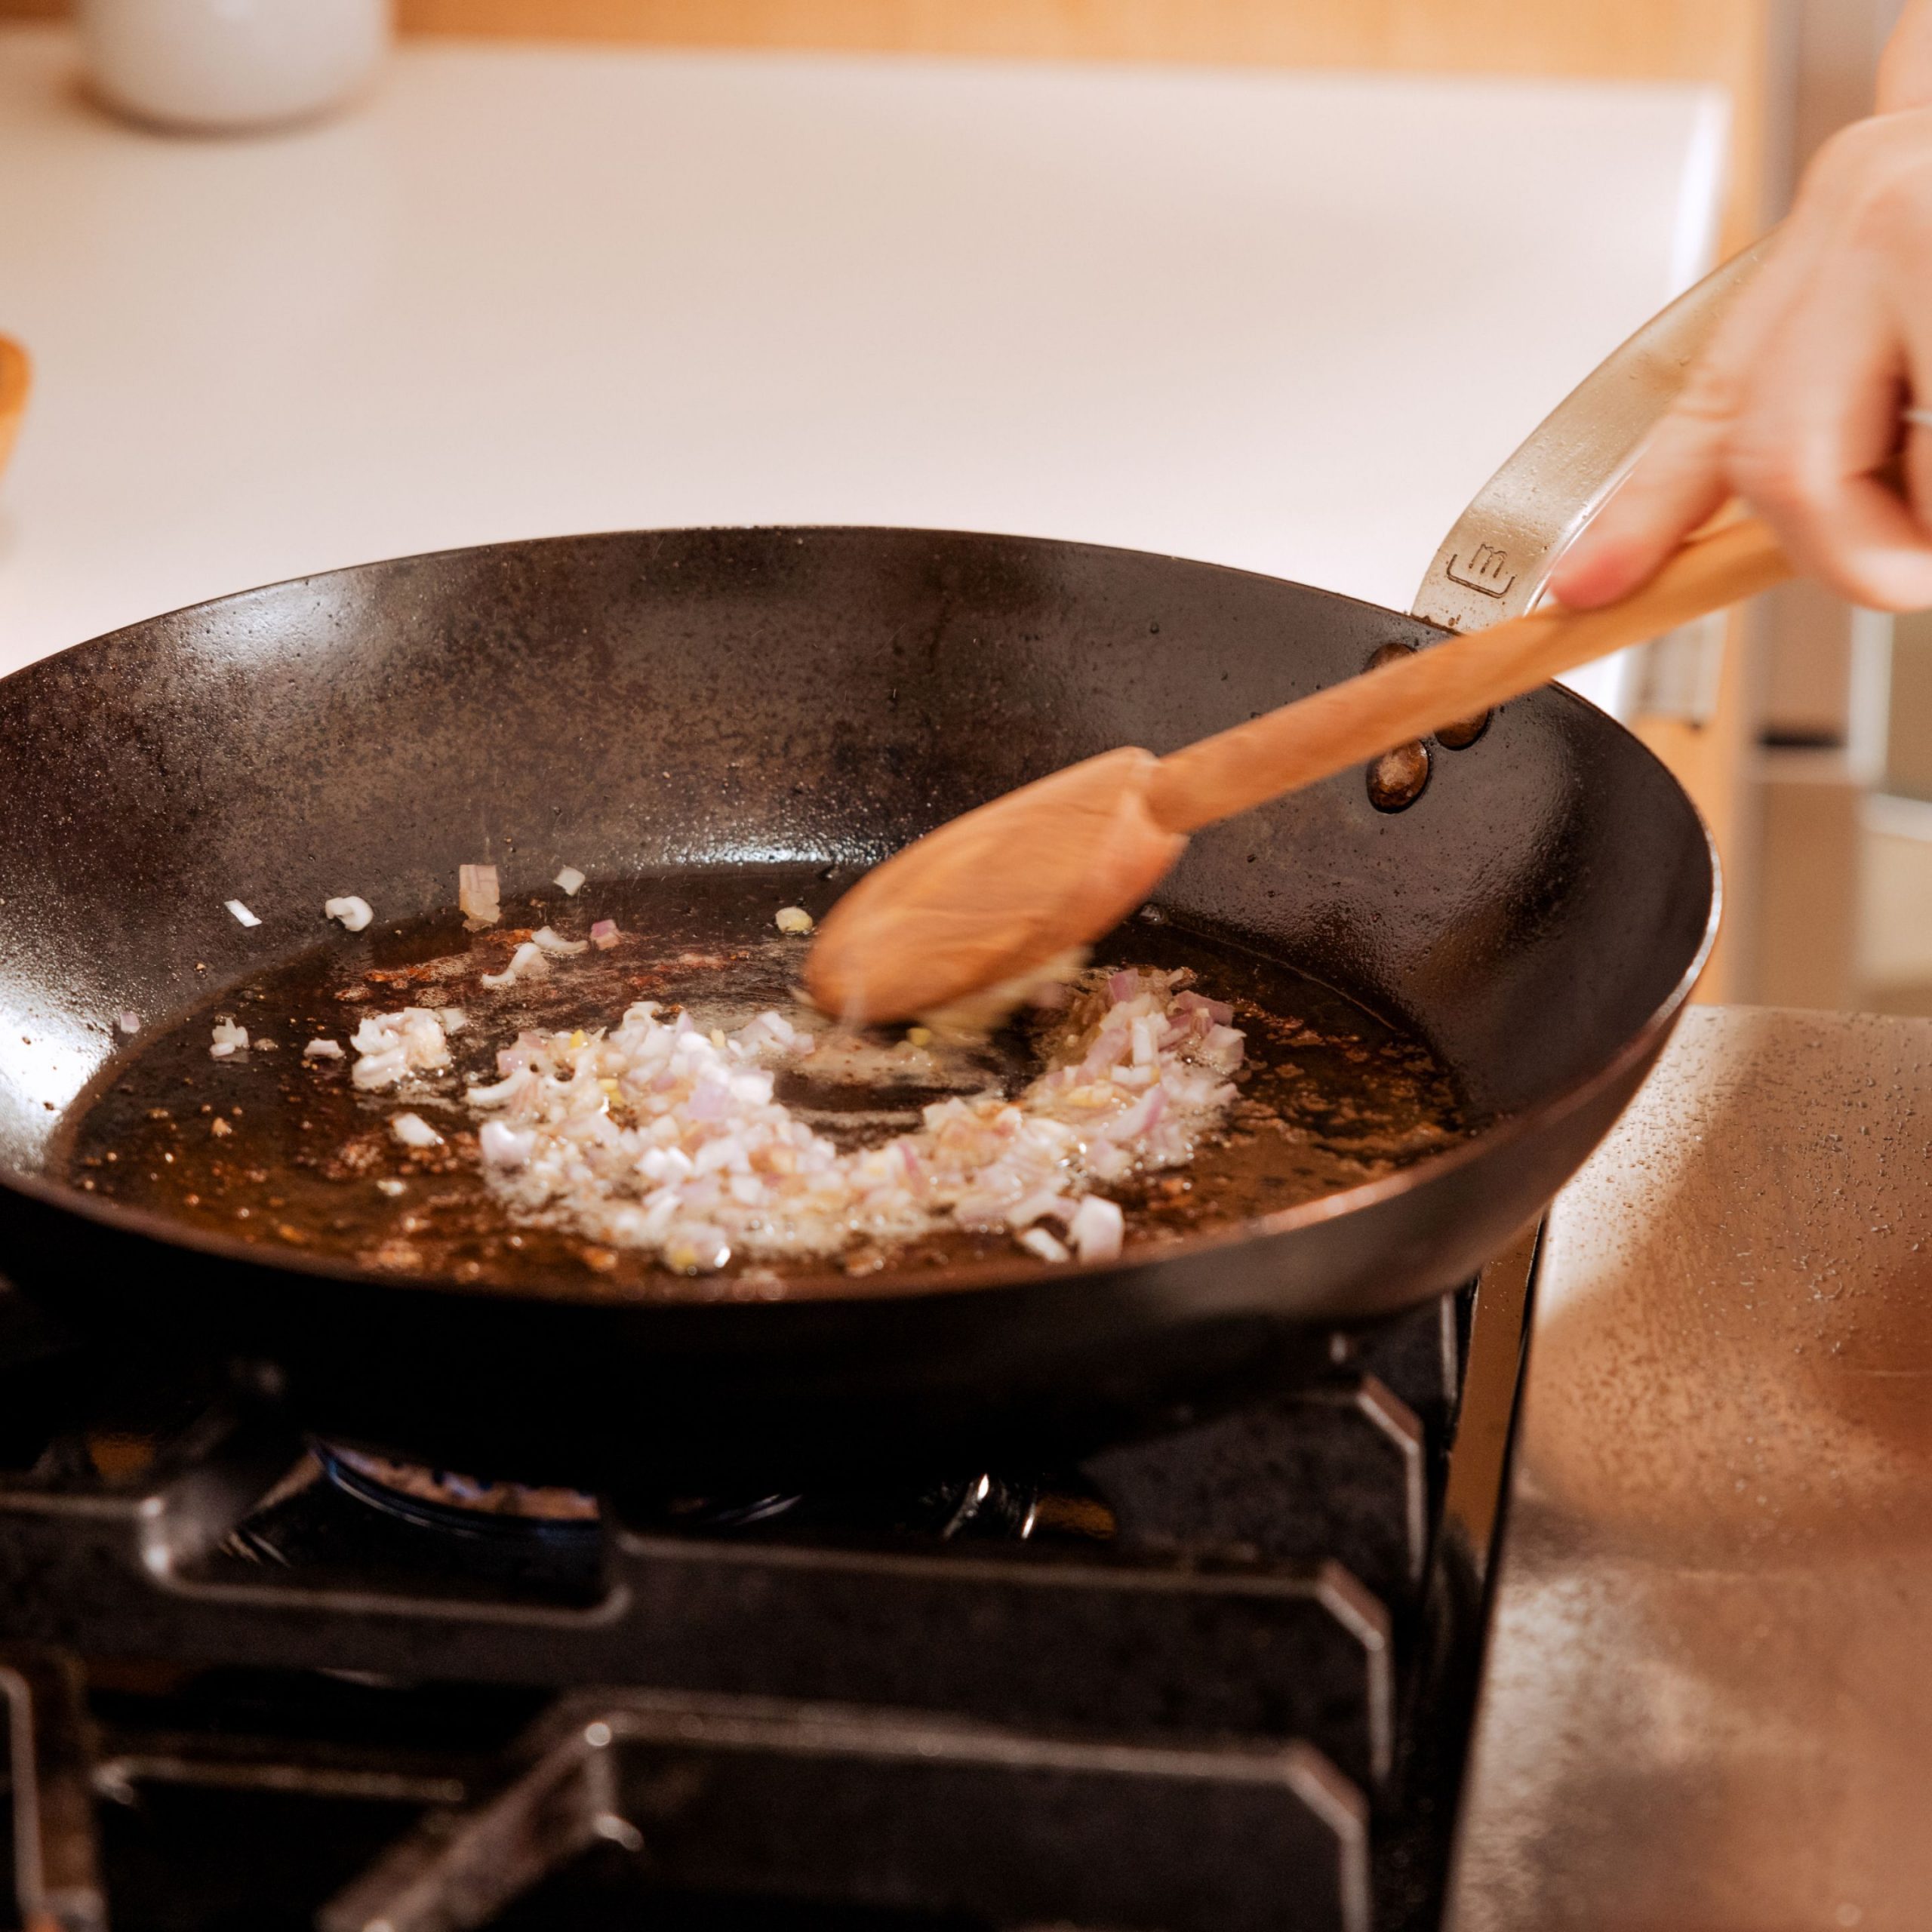 This Made In Frying Pan Has Over 100,000 Fans—Here's What to Know